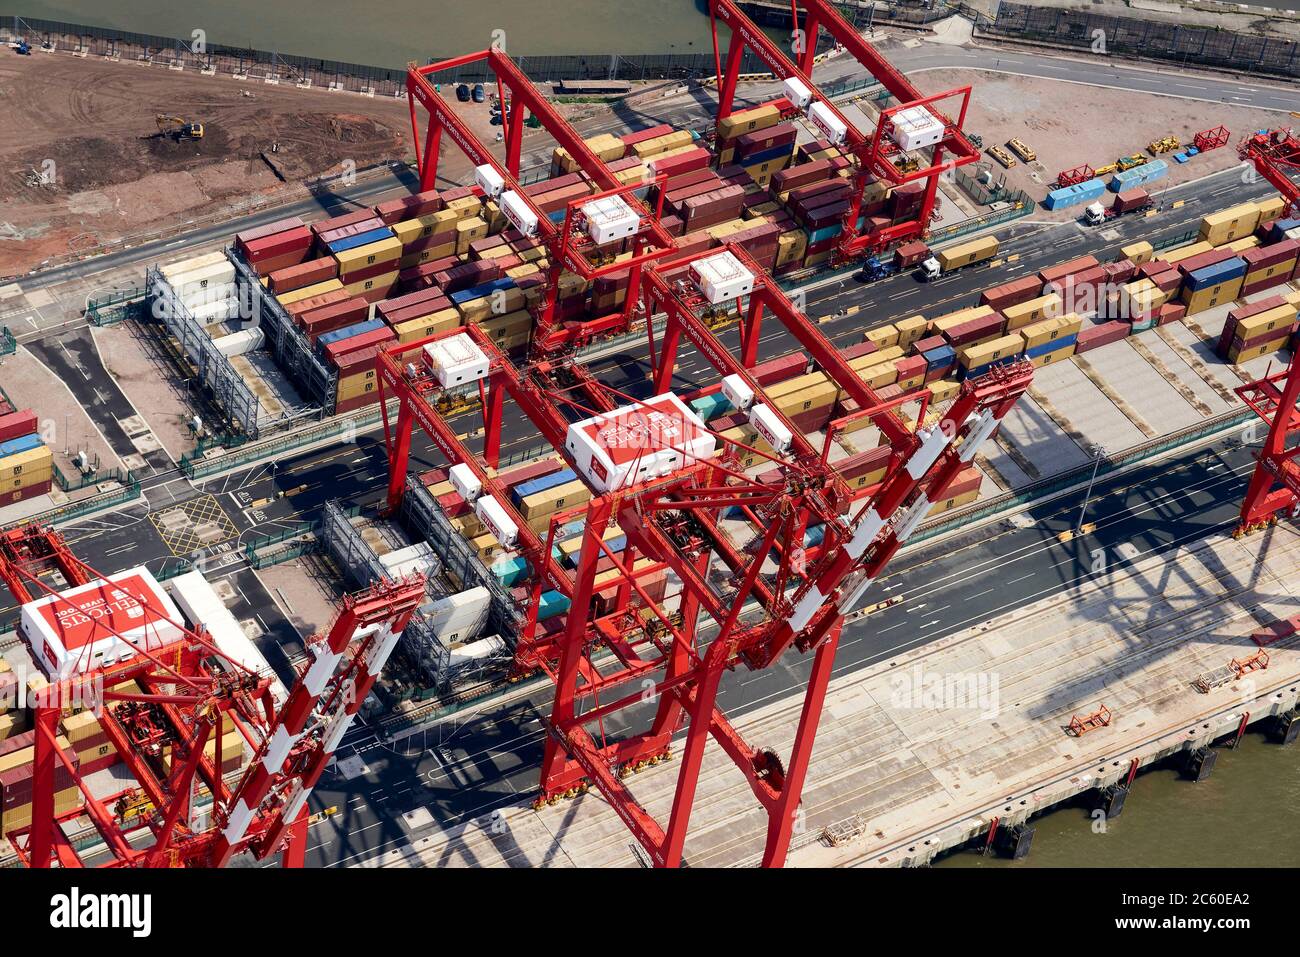 An aerial view of Peel Port, Seaforth Docks, Liverpool, Merseyside, North West England, UK Stock Photo